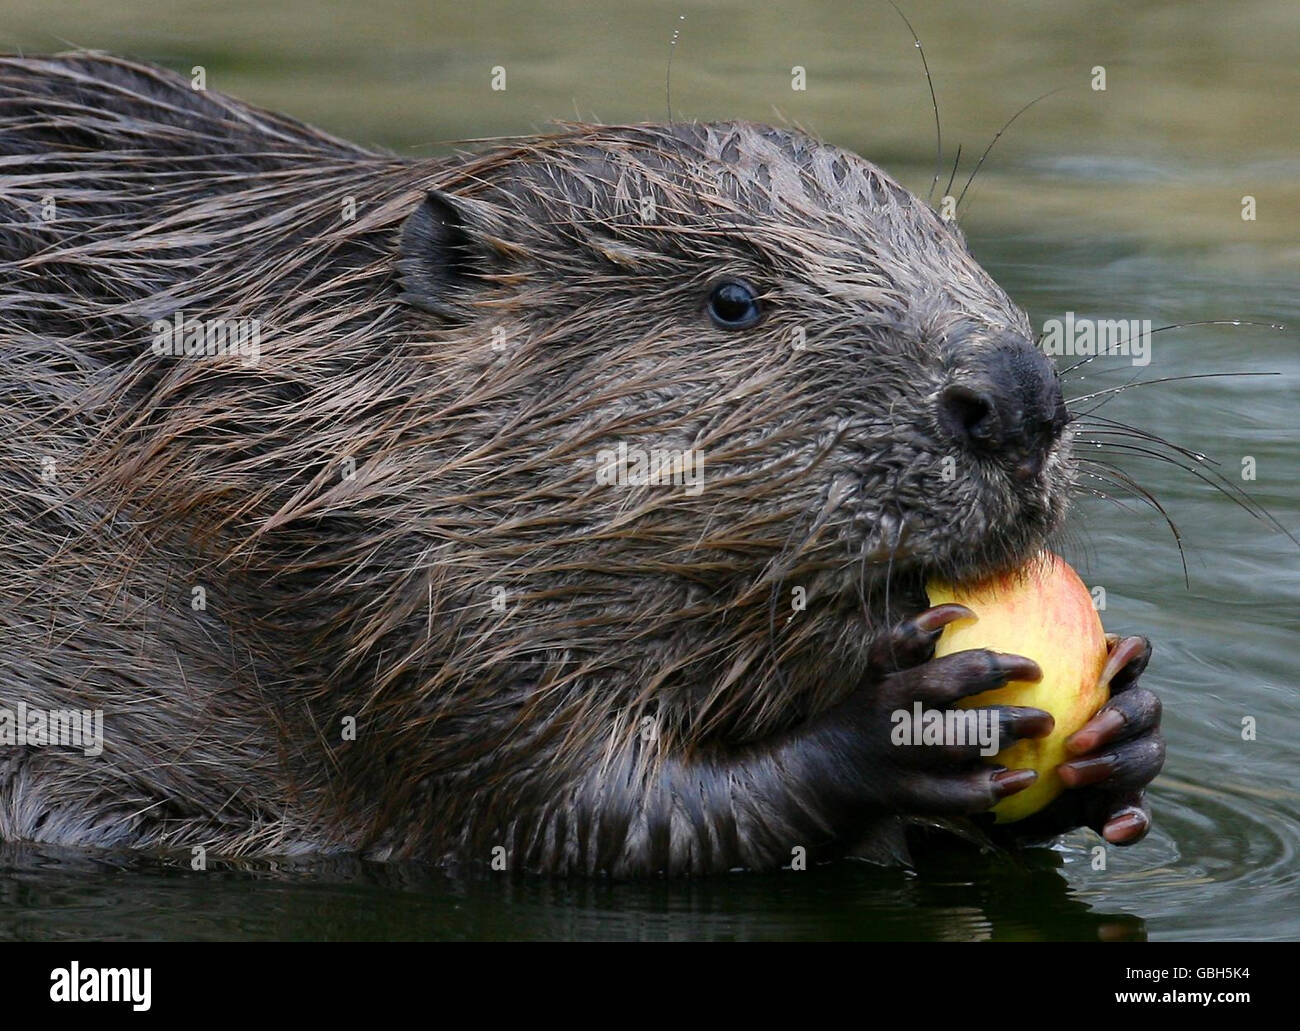 A Beaver eats an apple in its enclosure at the Wildwood Trust in Herne Bay, Kent, as details of a Beaver Reintroduction Feasibility study into reintroducing the European Beaver into England is announced. Stock Photo